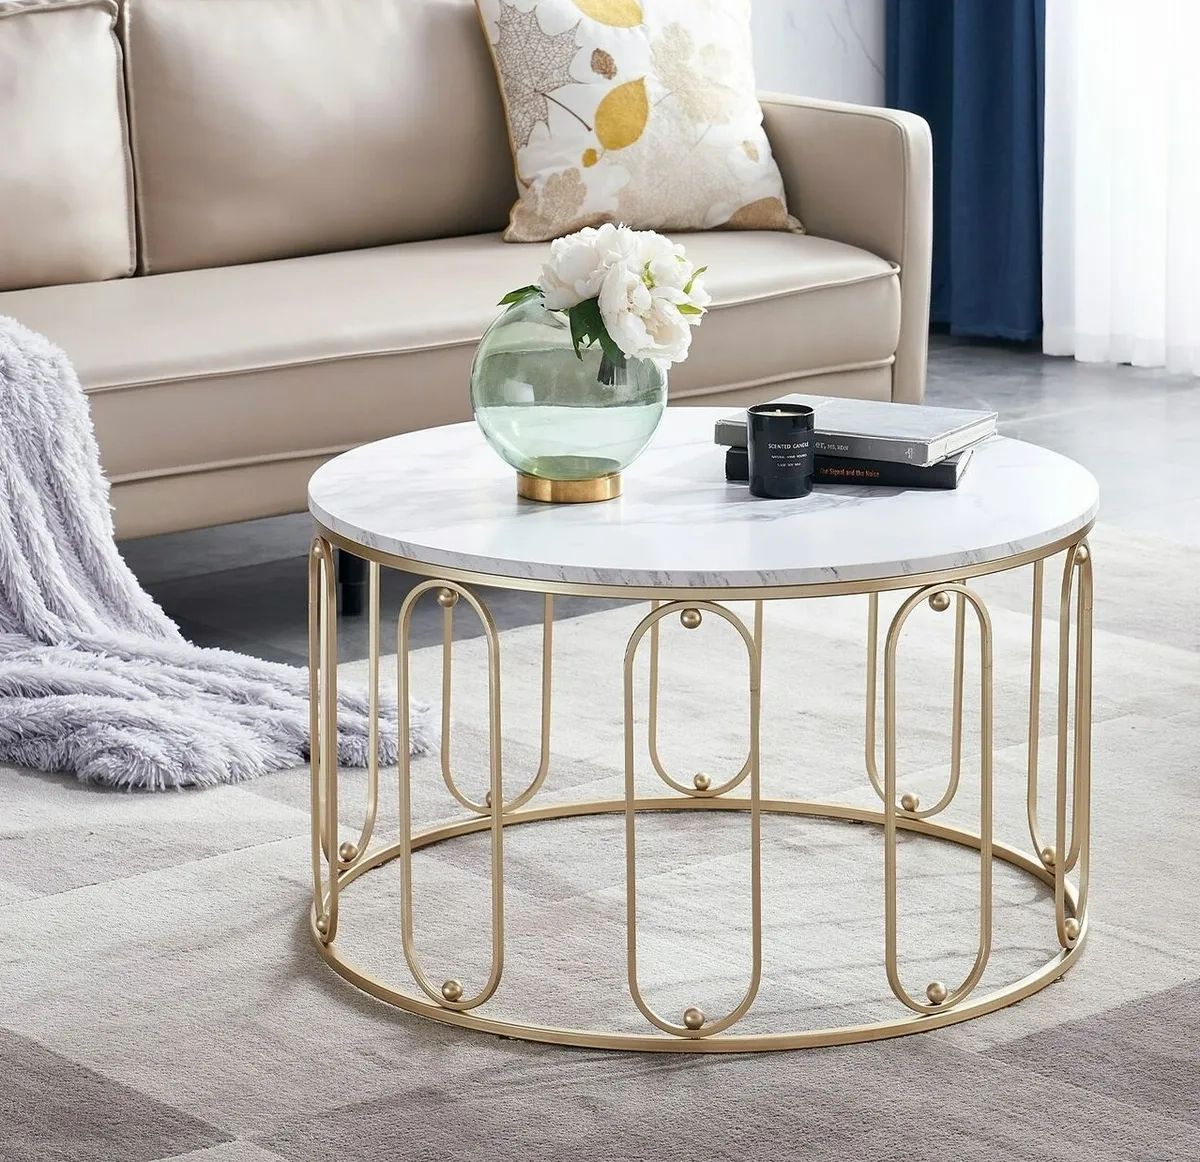 Ivinta Modern Nesting Coffee Table, Home Round Cocktail Table With Metal  Frame | Ebay Regarding Nesting Coffee Tables (Photo 12 of 15)